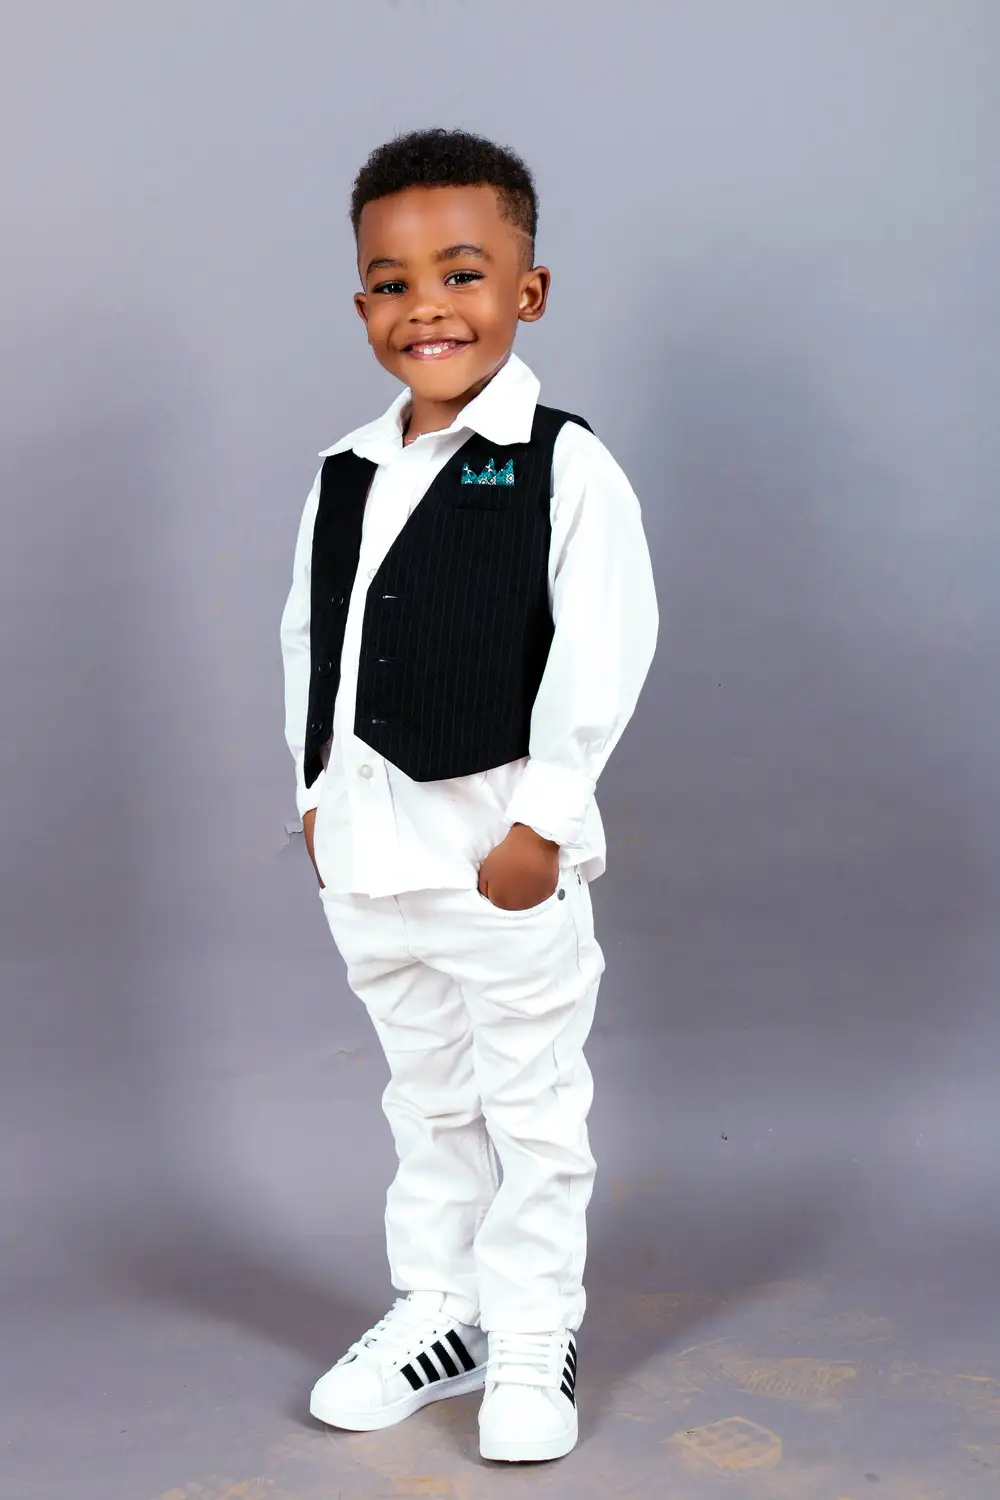 Child in a white outfit and black waist coat